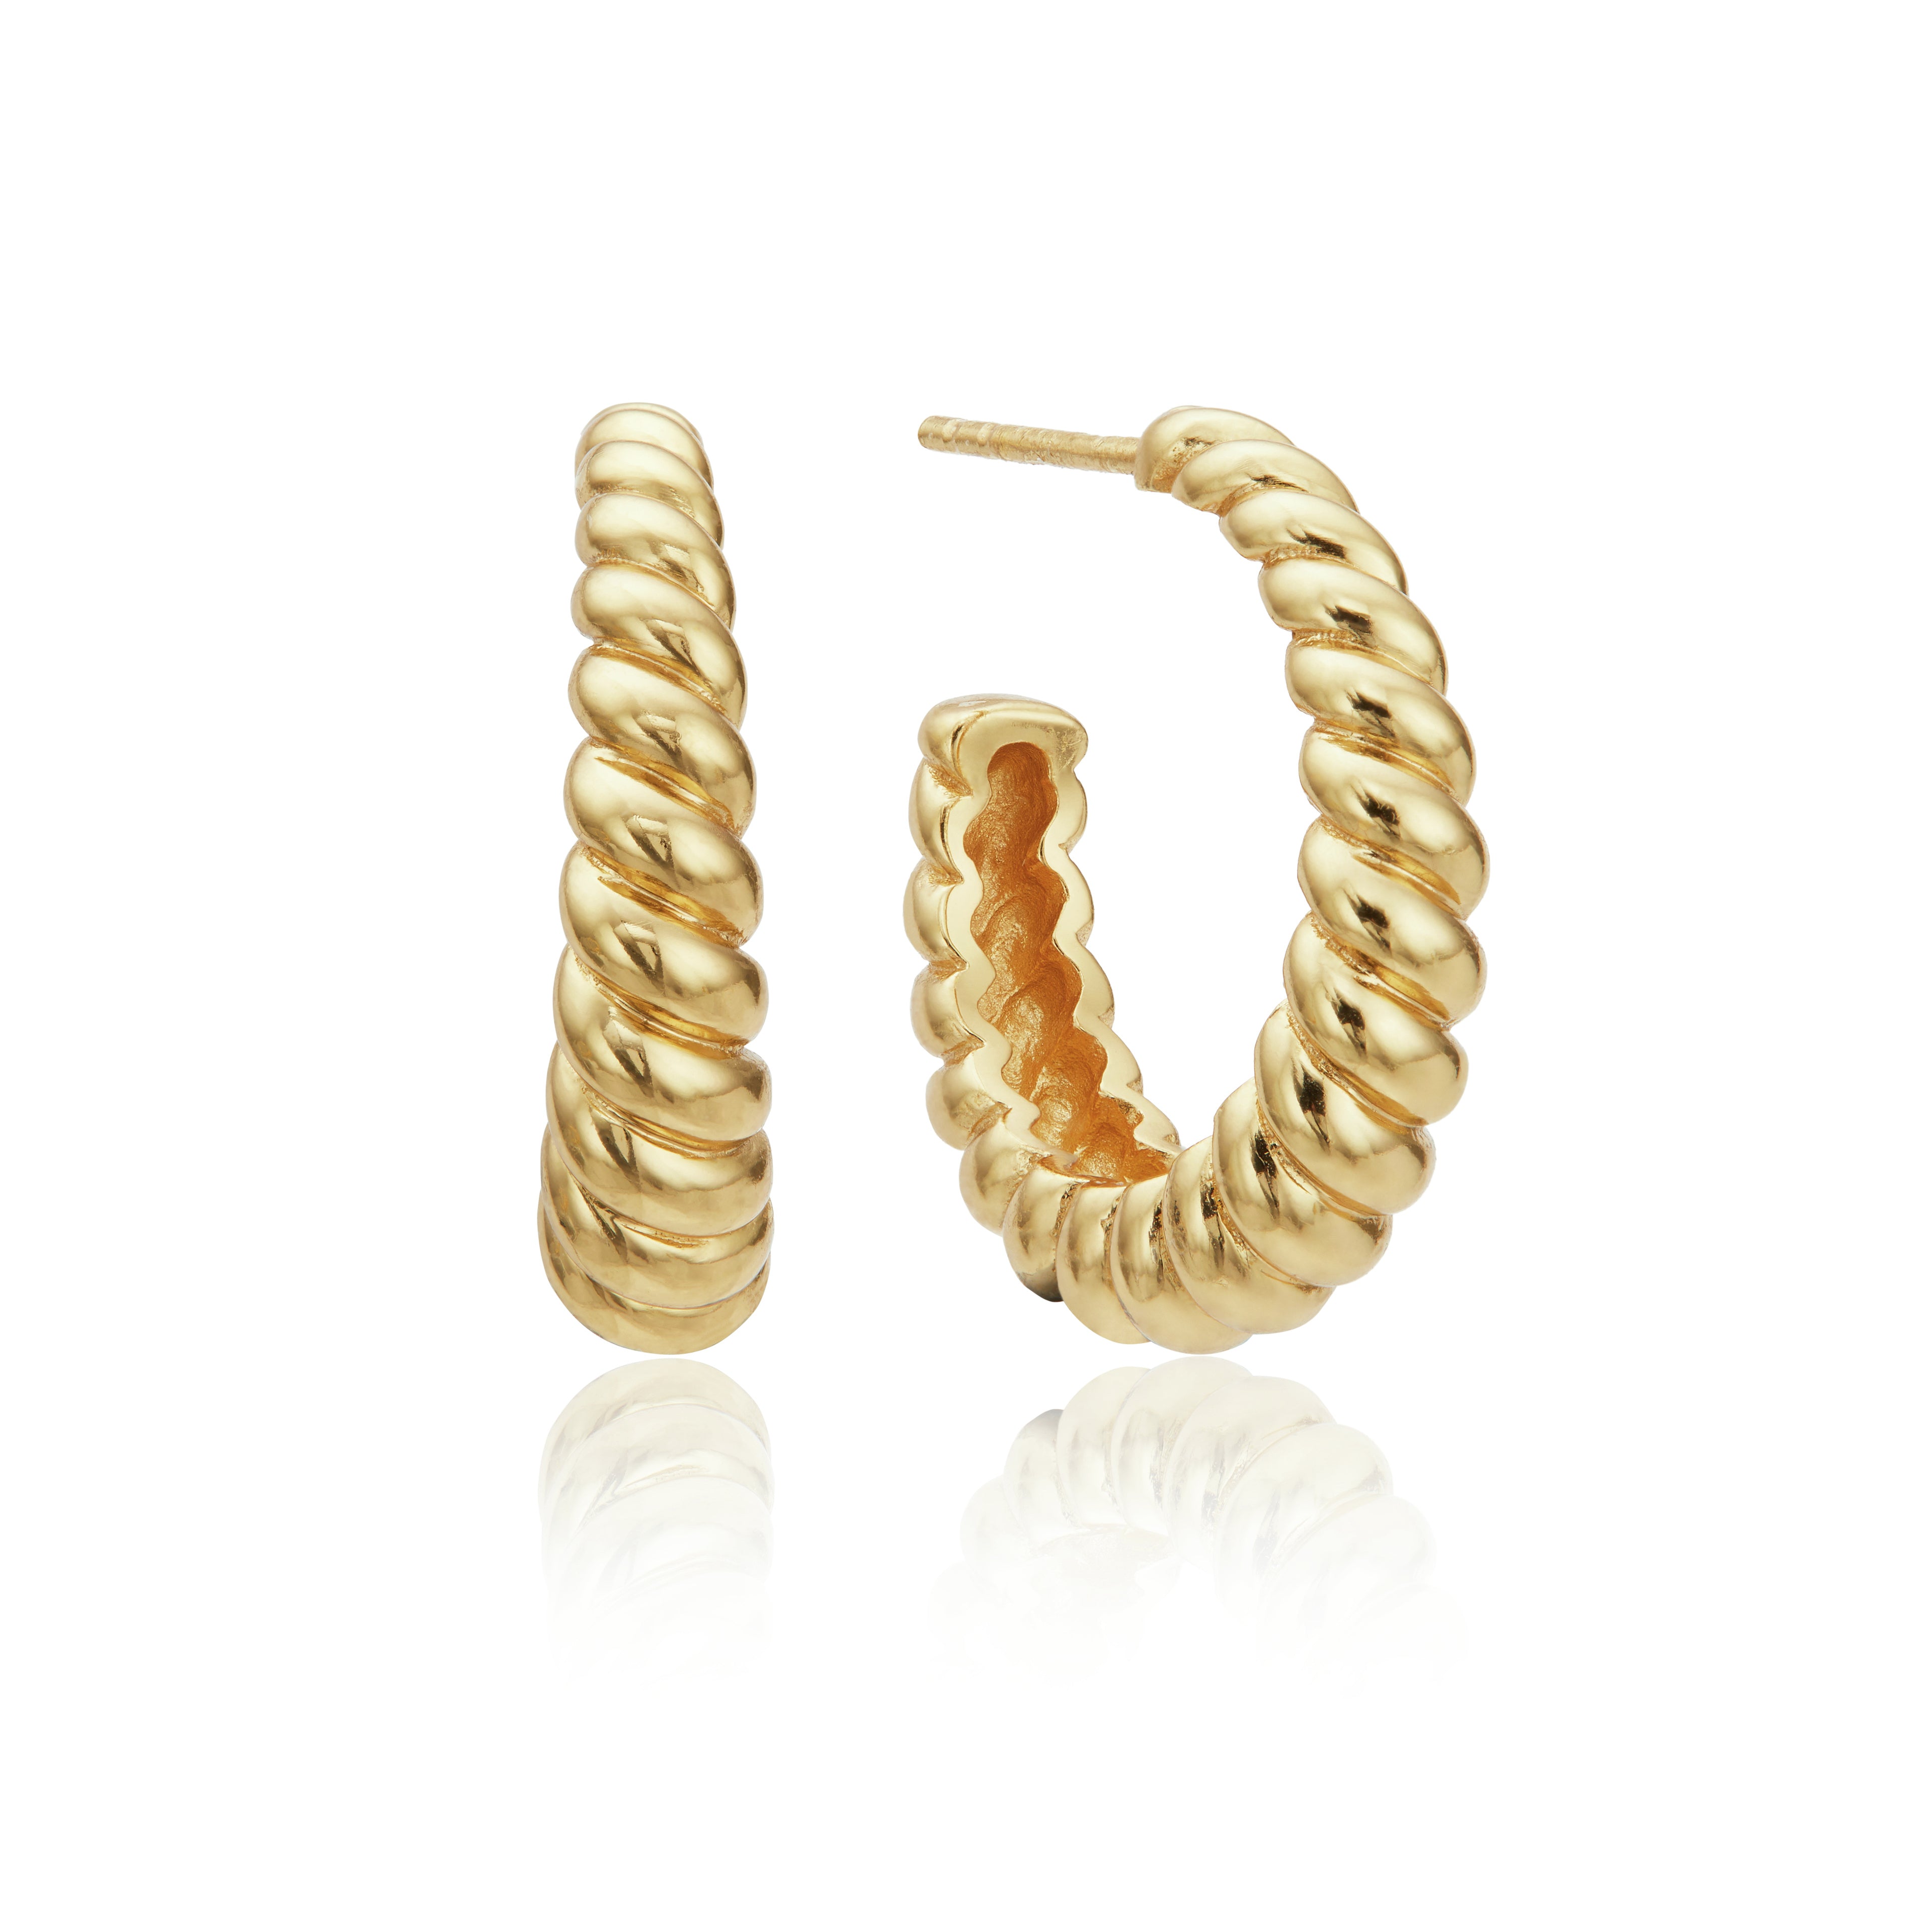 Gold large twisted rope hoop earrings on a white background